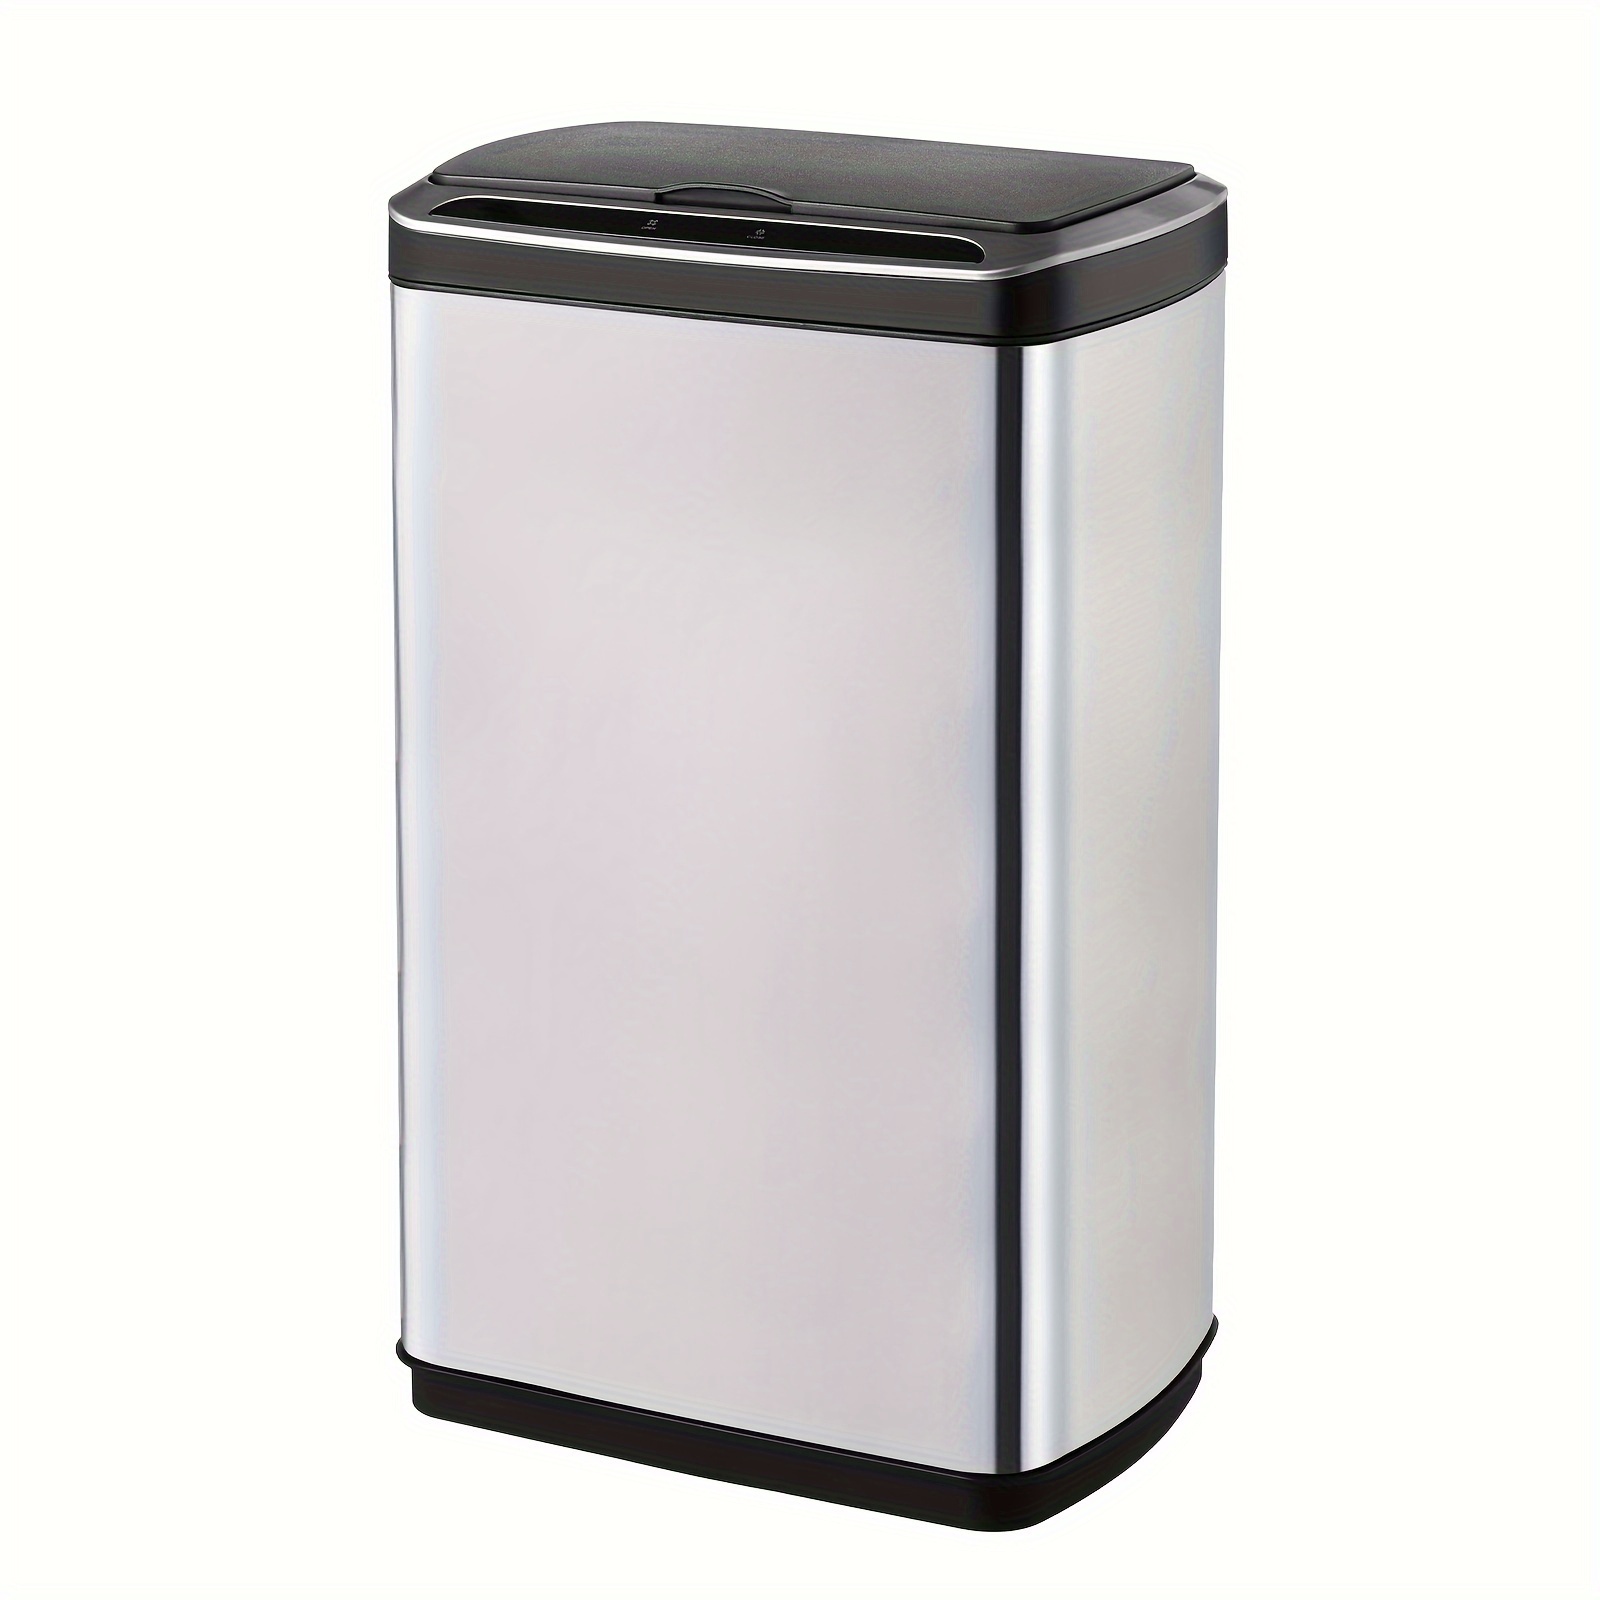 

Elpheco 50 Liter/ 13.2 Gallon Rectangular Kitchen Trash Can, Brushed Stainless Steel Finish Motion Sensor Trash Can, Automatic Trash Can For Kitchen, Living Room, Office, 3 Aa Batteries (excluded)